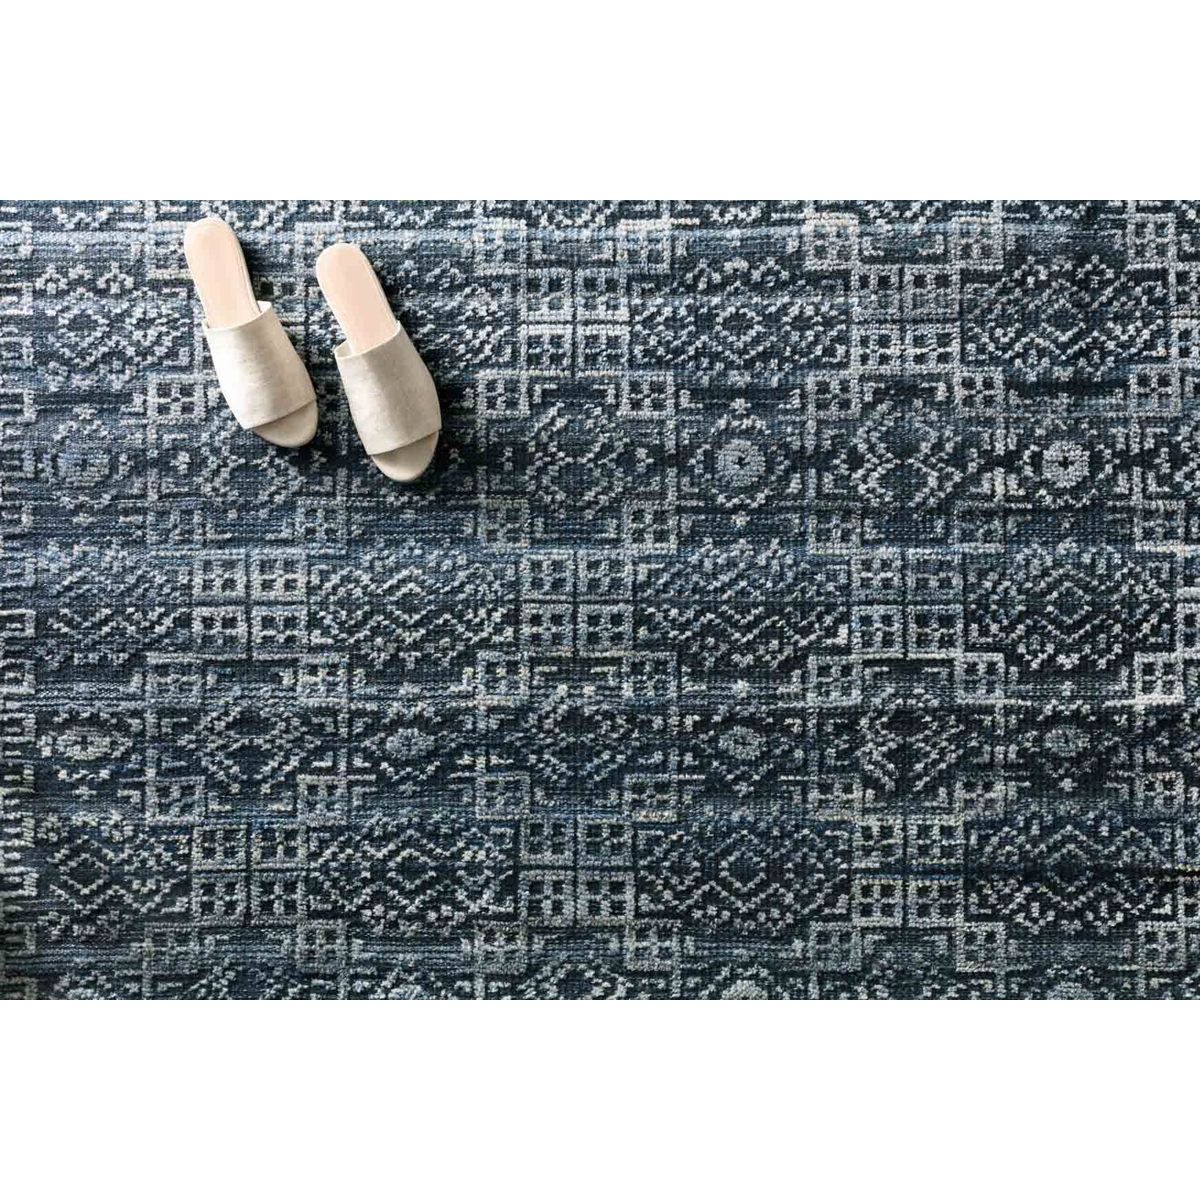 Both timeless and modern, the Idris Ink area rug from Loloi is meticulously hand-knotted in colors of navy, indigo, and grey. The tonal series features an elevated texture, accentuating the pattern in every piece. The Idris Ink Area Rug is hand-knotted with a blend of 70% Viscose and 30% Wool also known as ID-03 Ink.